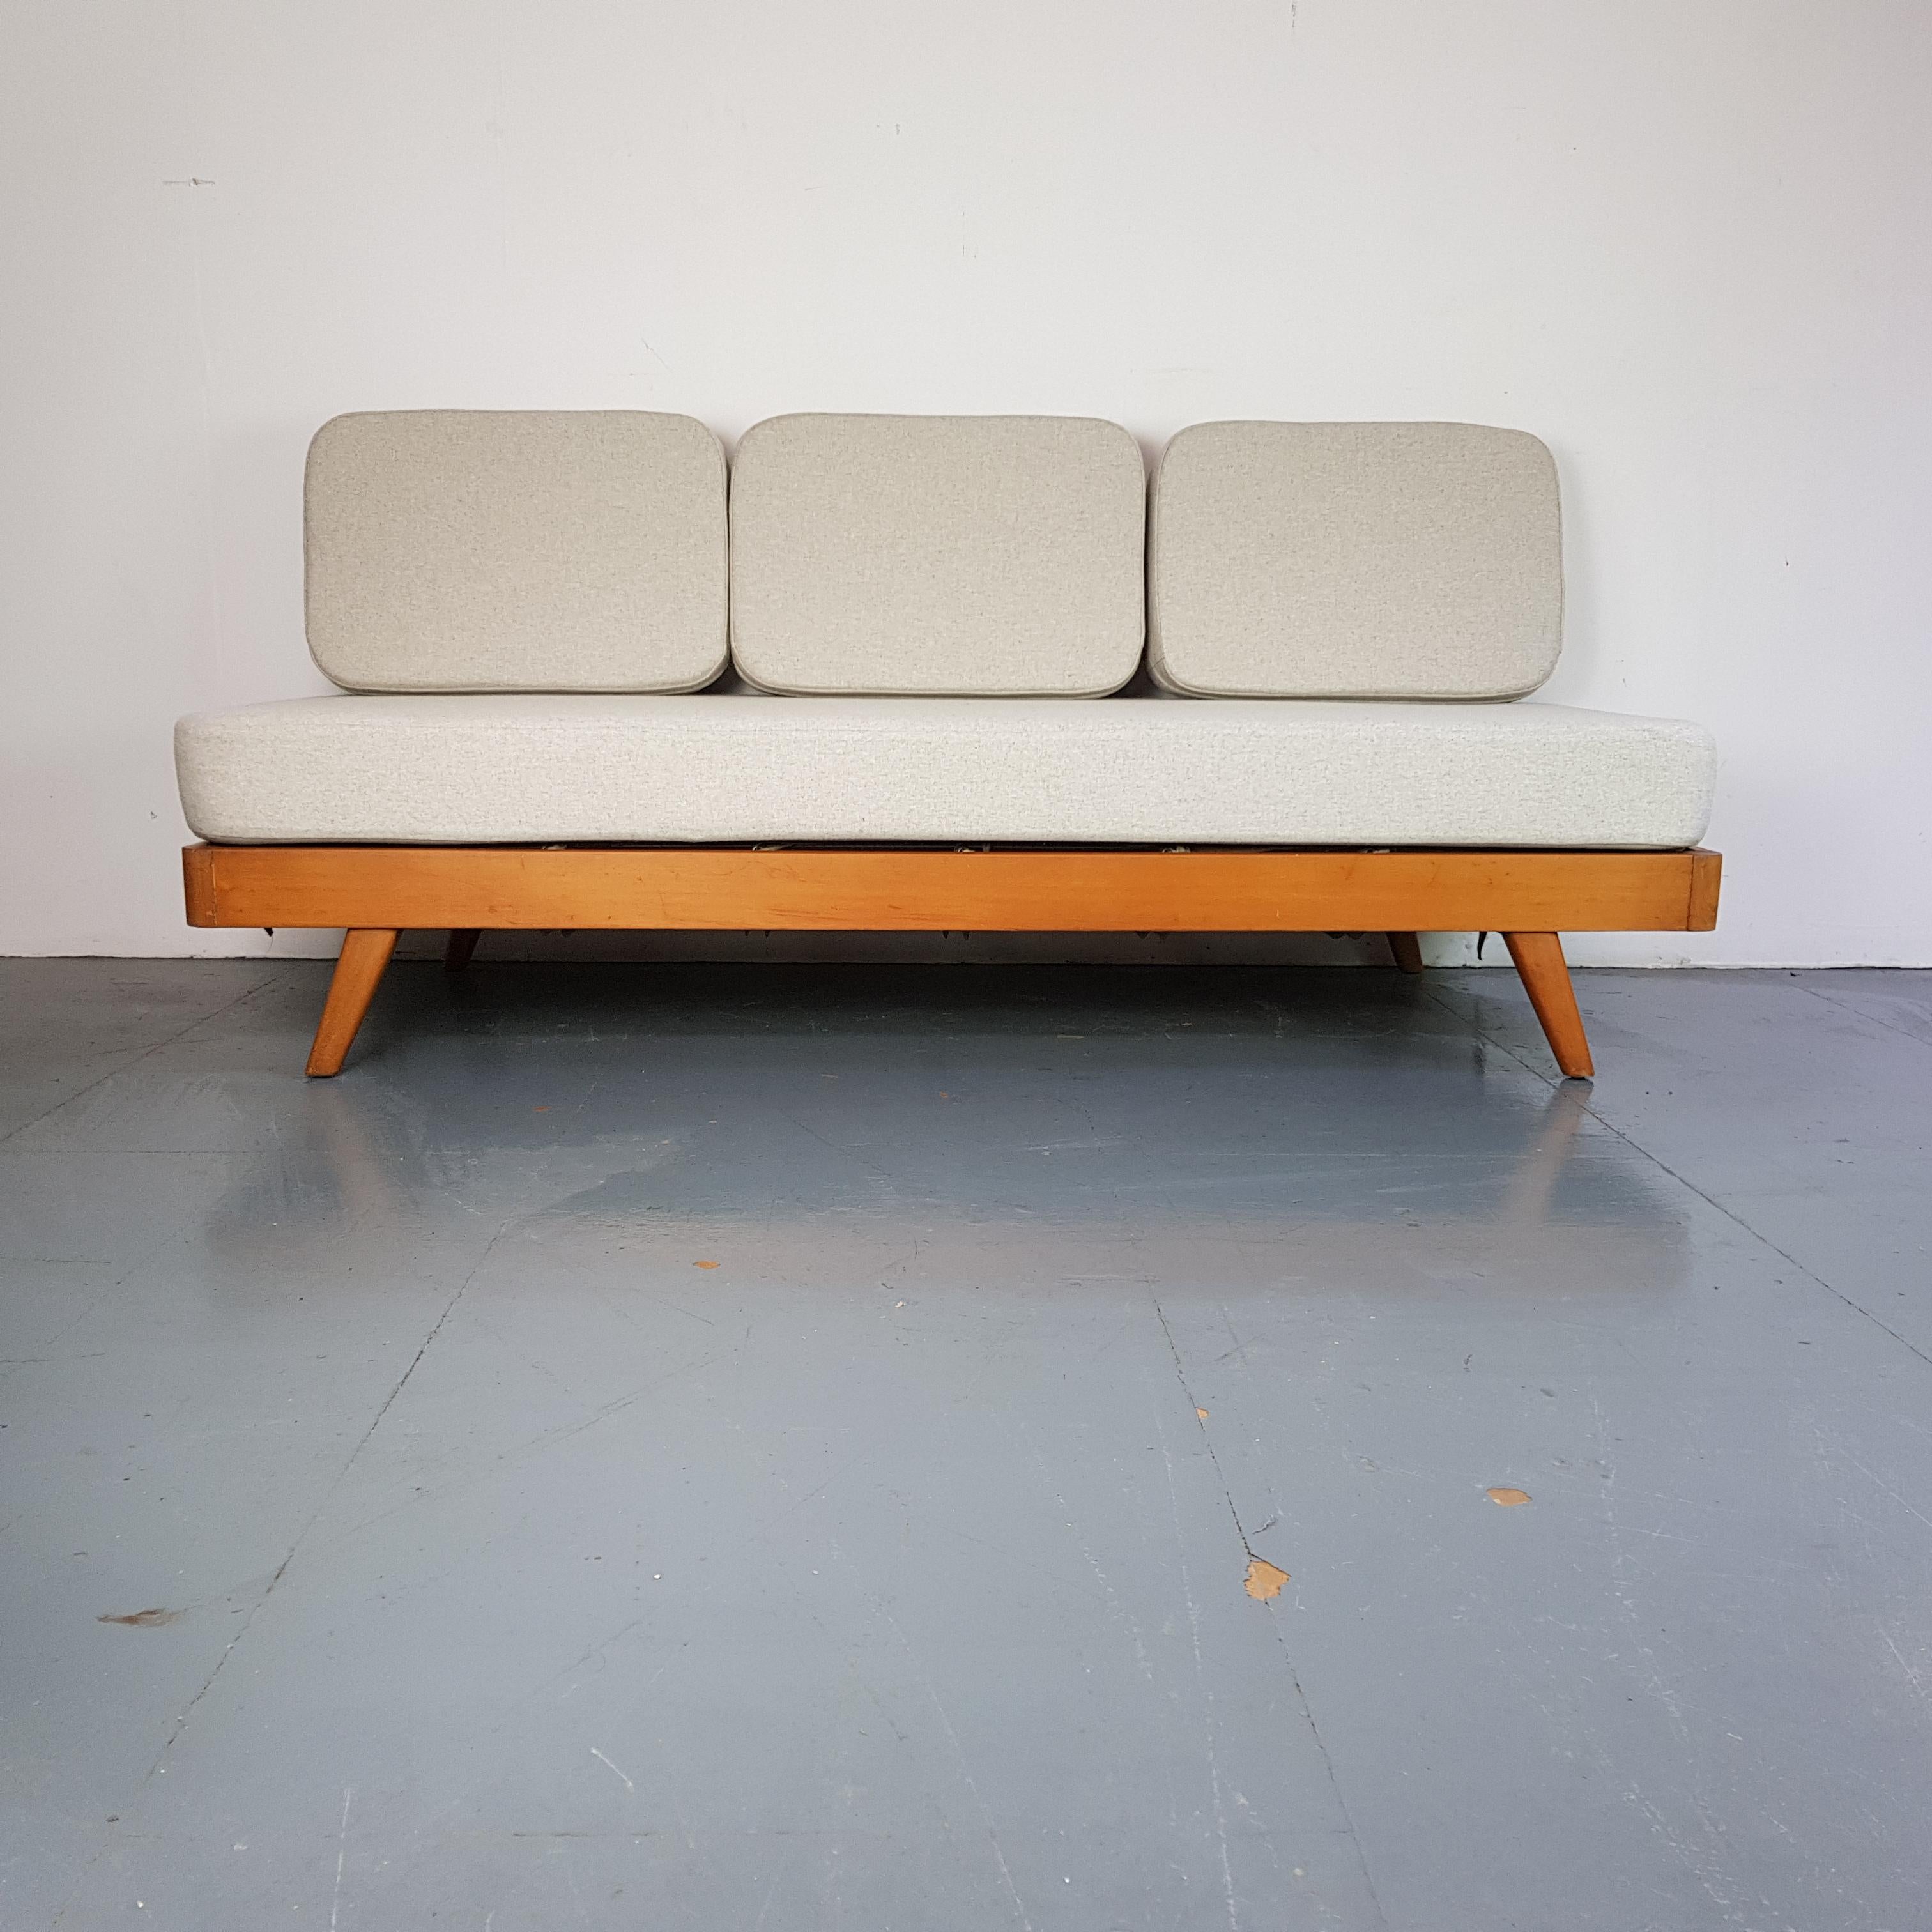 Vintage Danish 1960s daybed.

In very good vintage condition.

The cushions have been reupholstered in a light grey fabric. They are removable and the back can be folded down to create a sofa bed. 

The foam cushion pads are all new as well